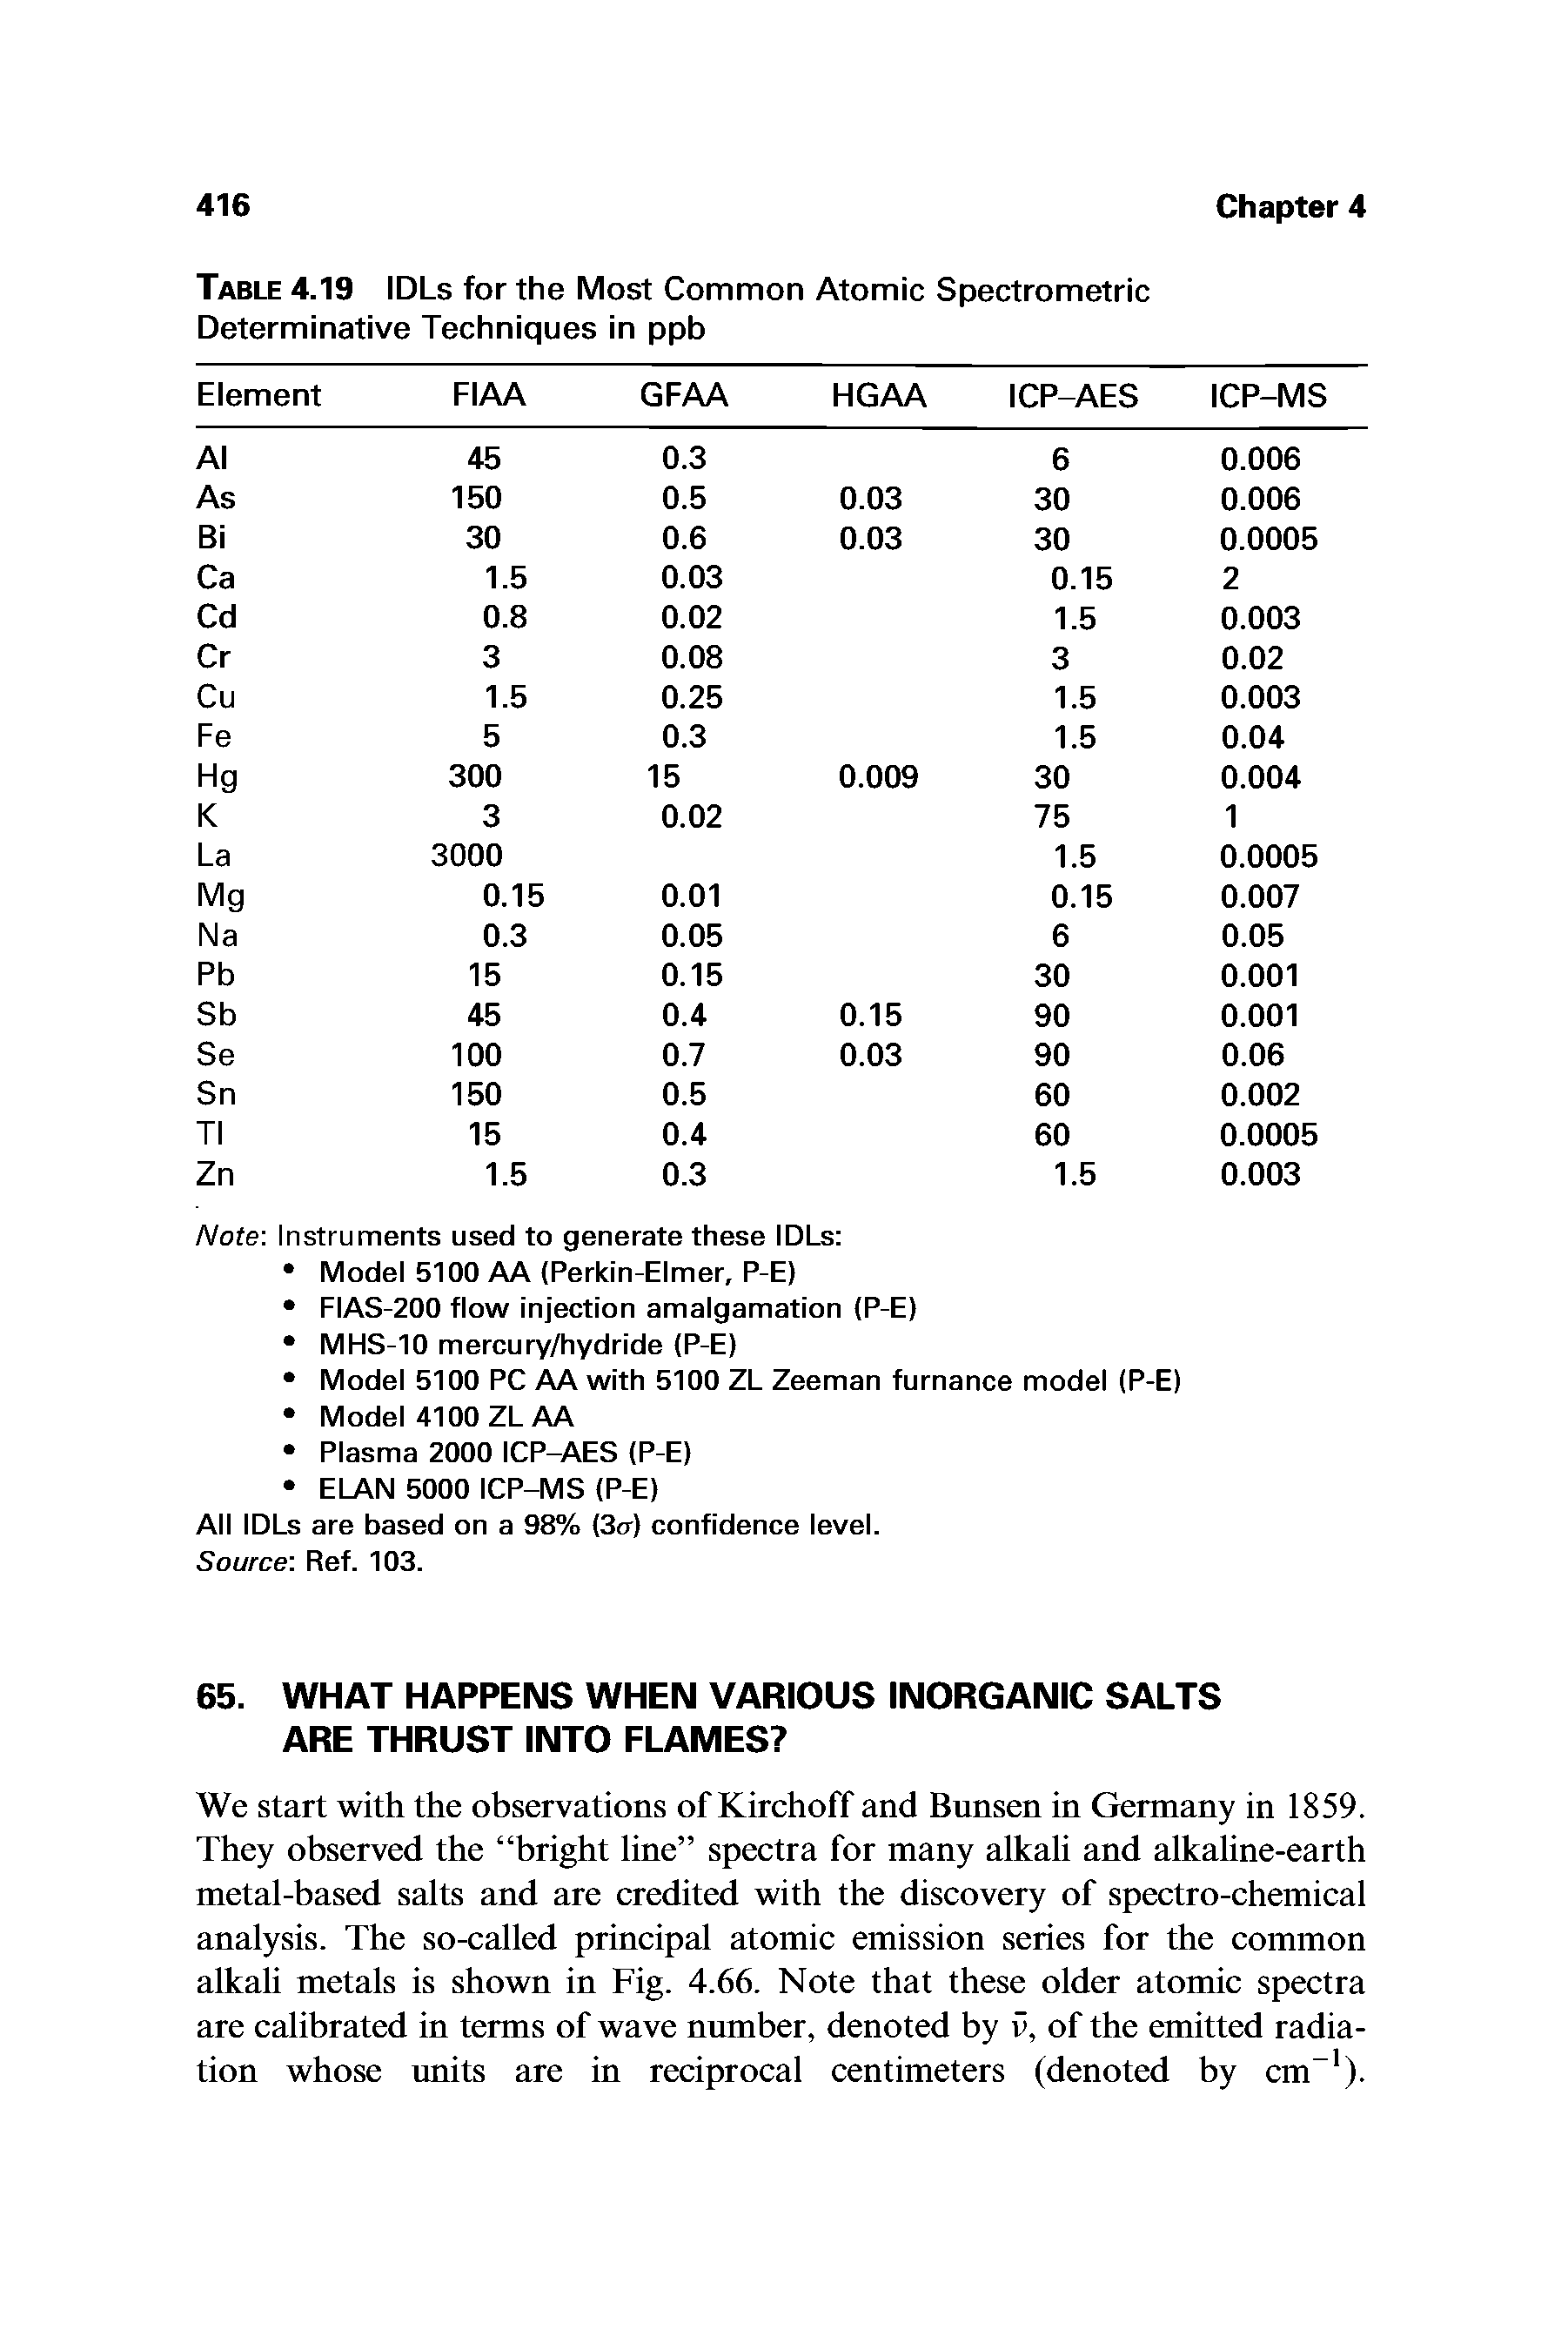 Table 4.19 IDLs for the Most Common Atomic Spectrometric Determinative Techniques in ppb...